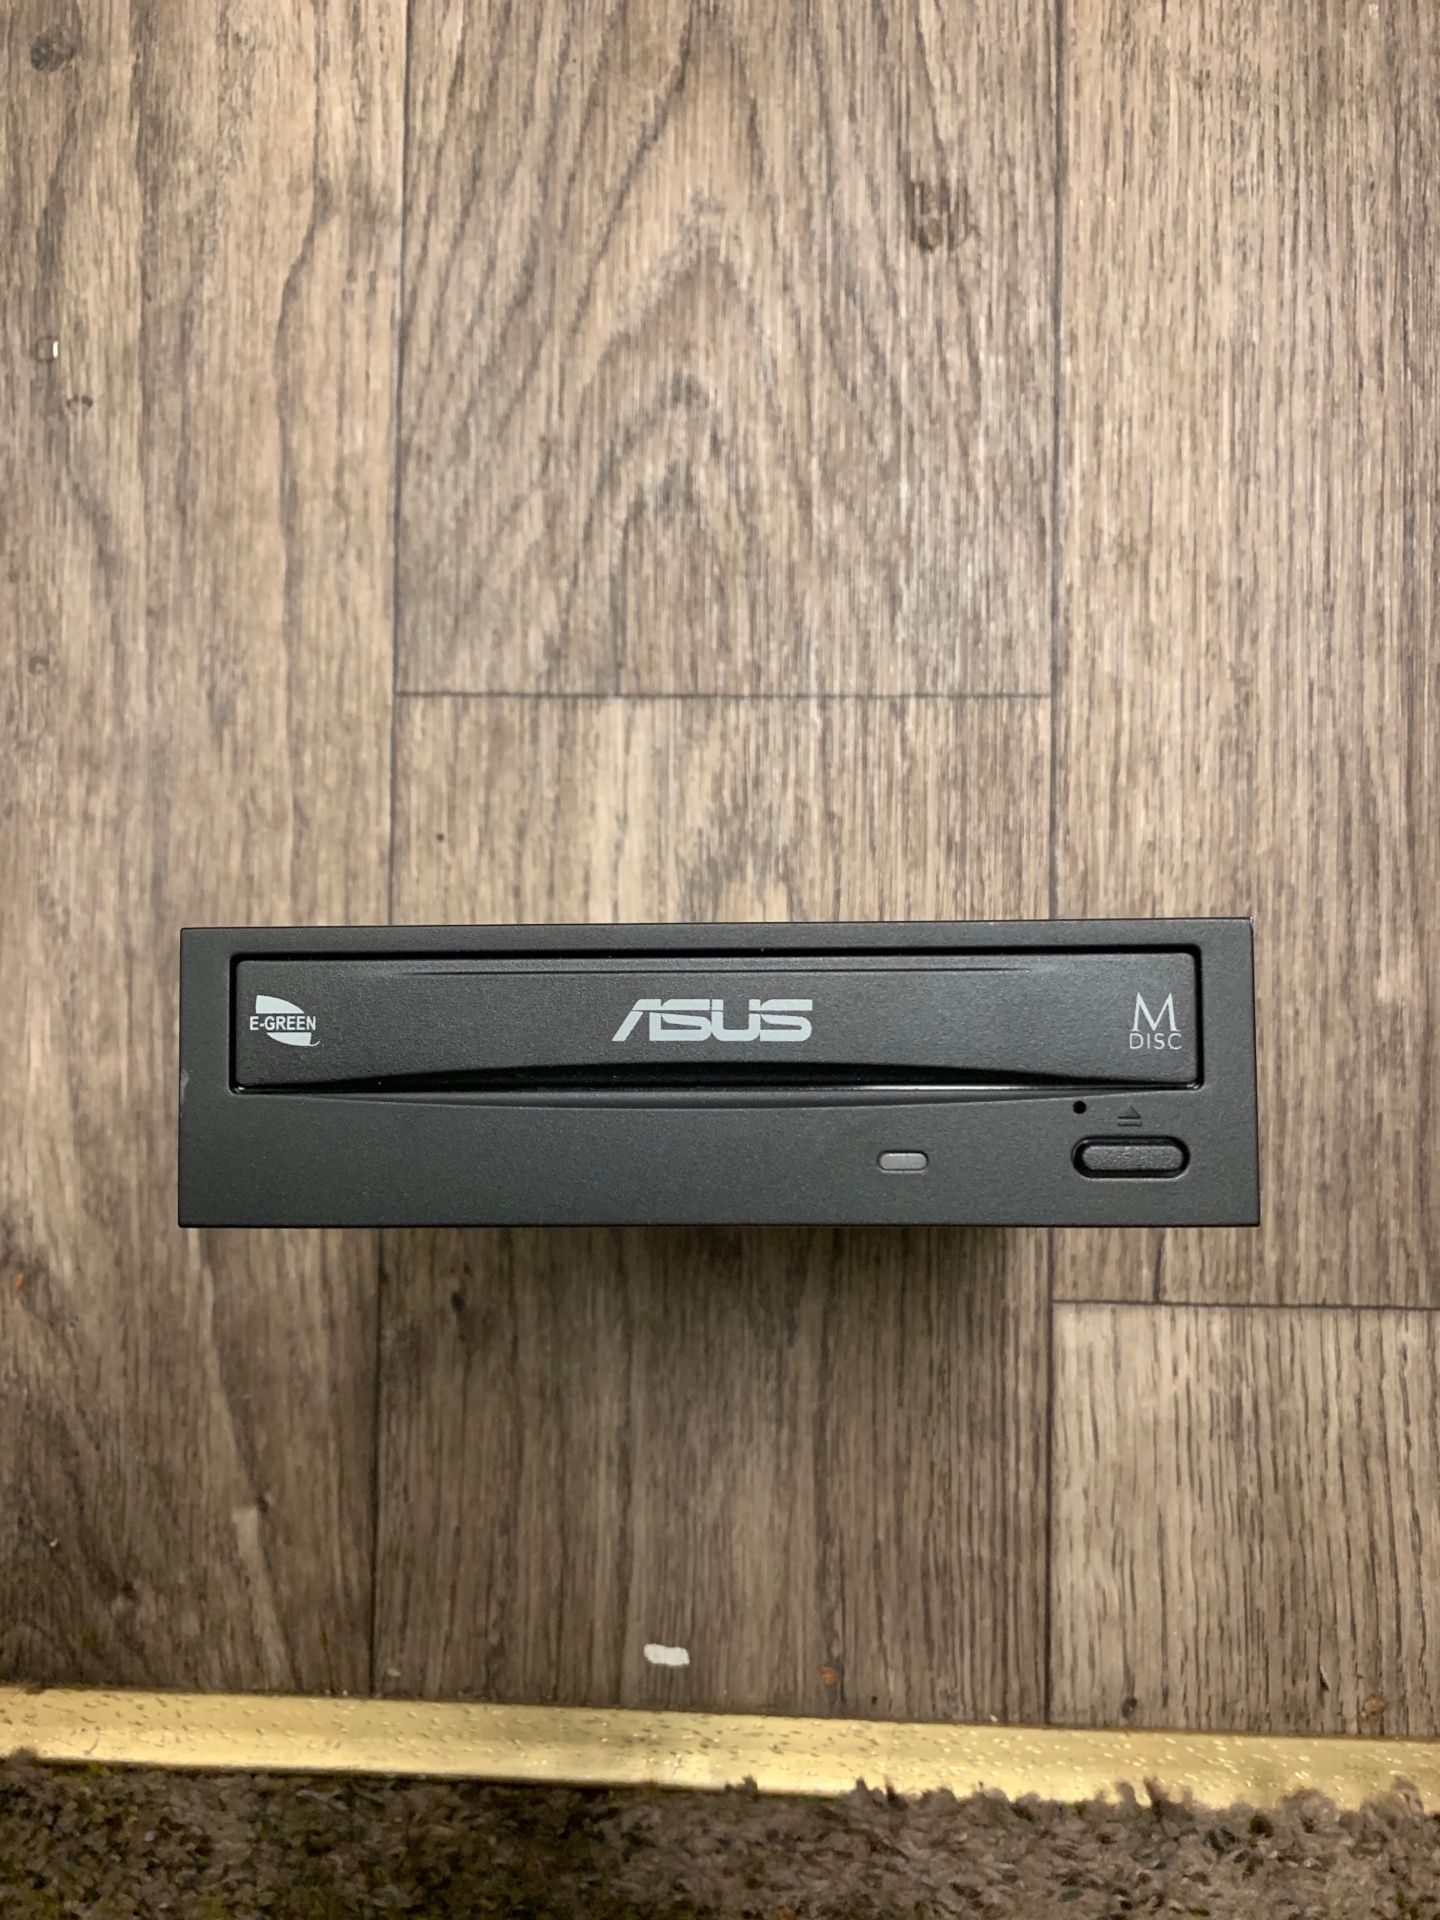 Asus DVD-RW/CD-RW drive for PC New